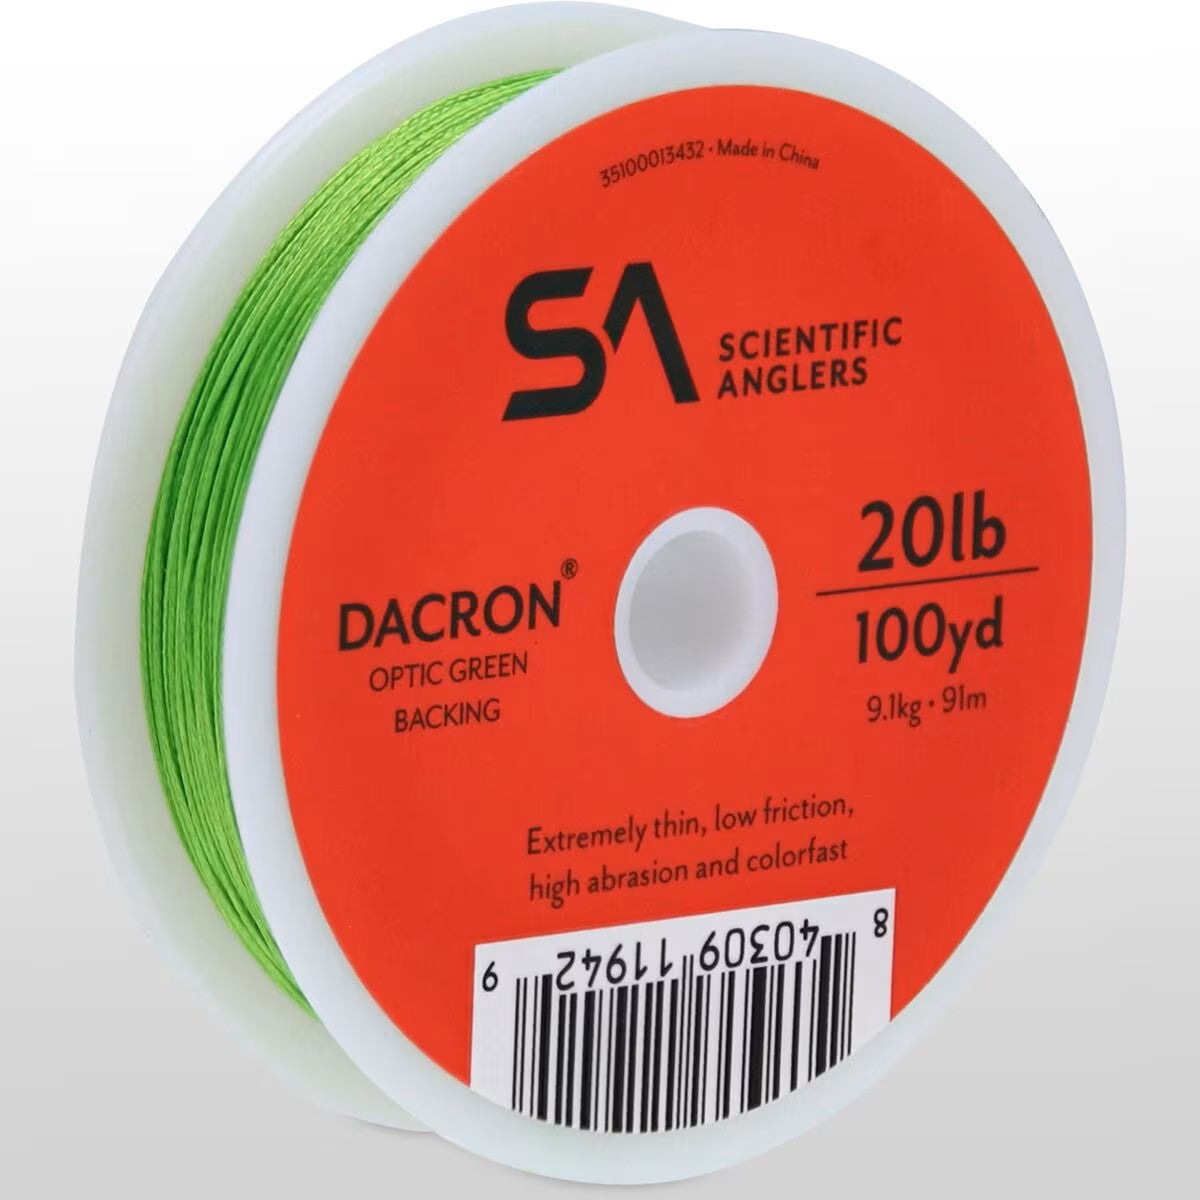 Scientific Anglers Dacron Backing in Blue 20lb - 200yds